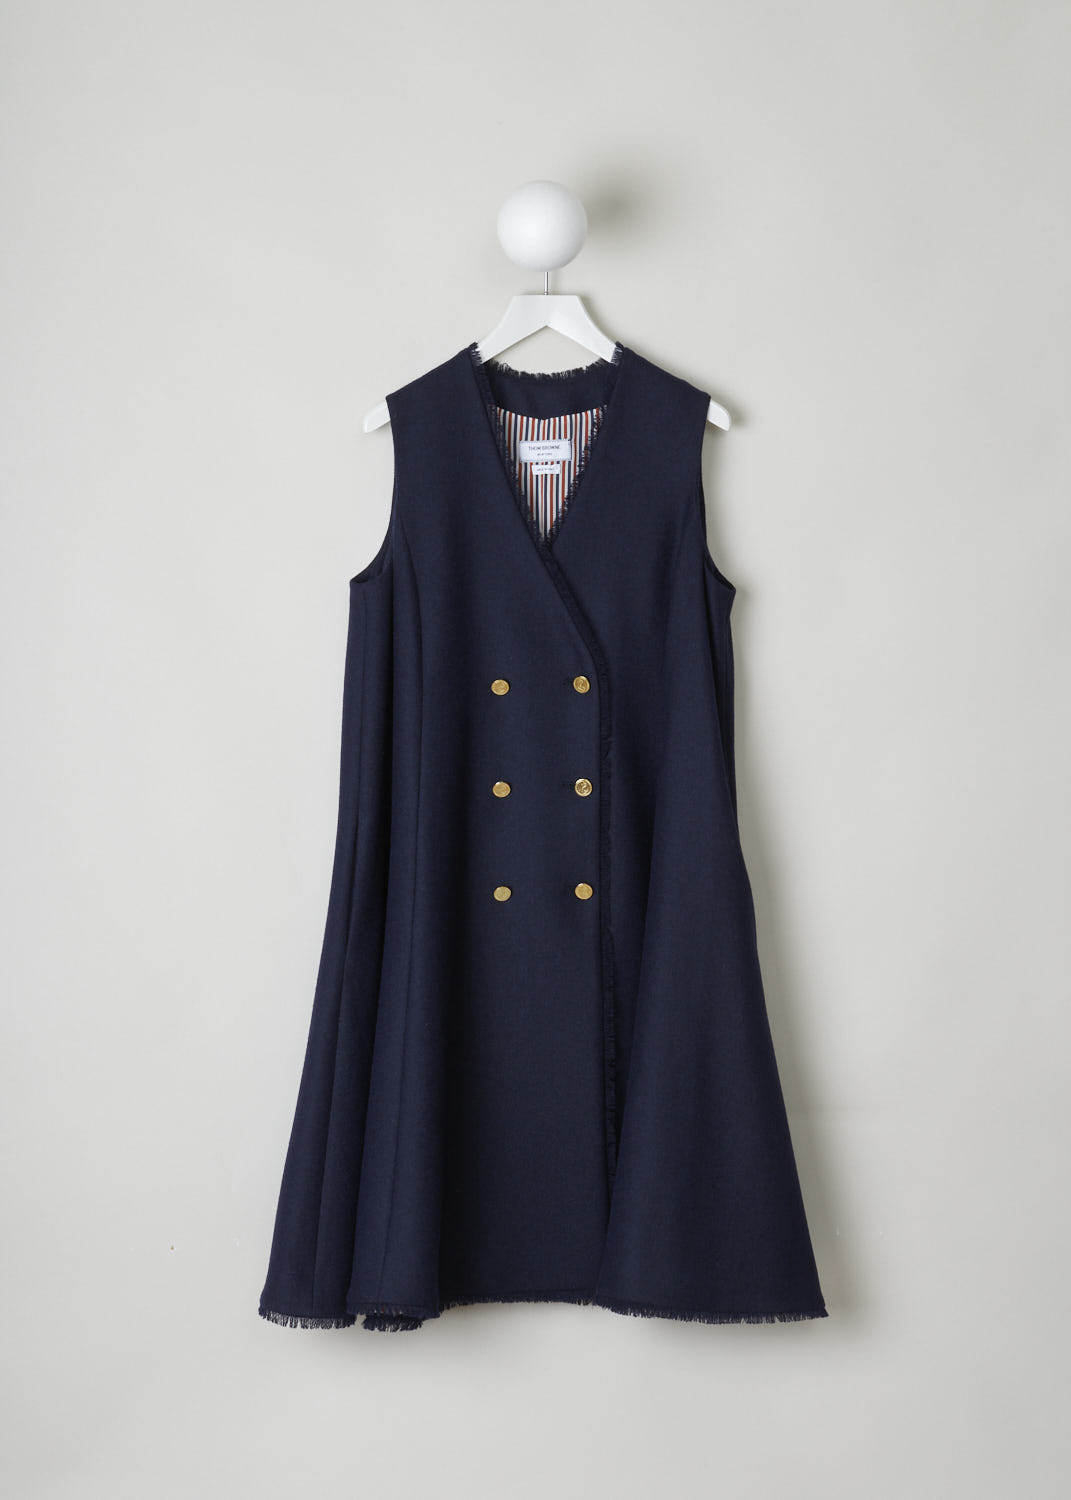 THOM BROWNE, NAVY BLUE A-LINE WAIST COAT DRESS, FDSB68T_03793_415, Blue, Front, Structured, navy blue sleeveless waistcoat dress. The model has an A-line silhouette. This garment has a V-neck and a double breasted front, with golden-tone buttons. The hem has frayed edges. On either side, concealed pockets can be found along the seams. In the back, a rear slit can be found, decorated with a single golden-tone button. In the neck, the signature tri-colored tab can be found.
